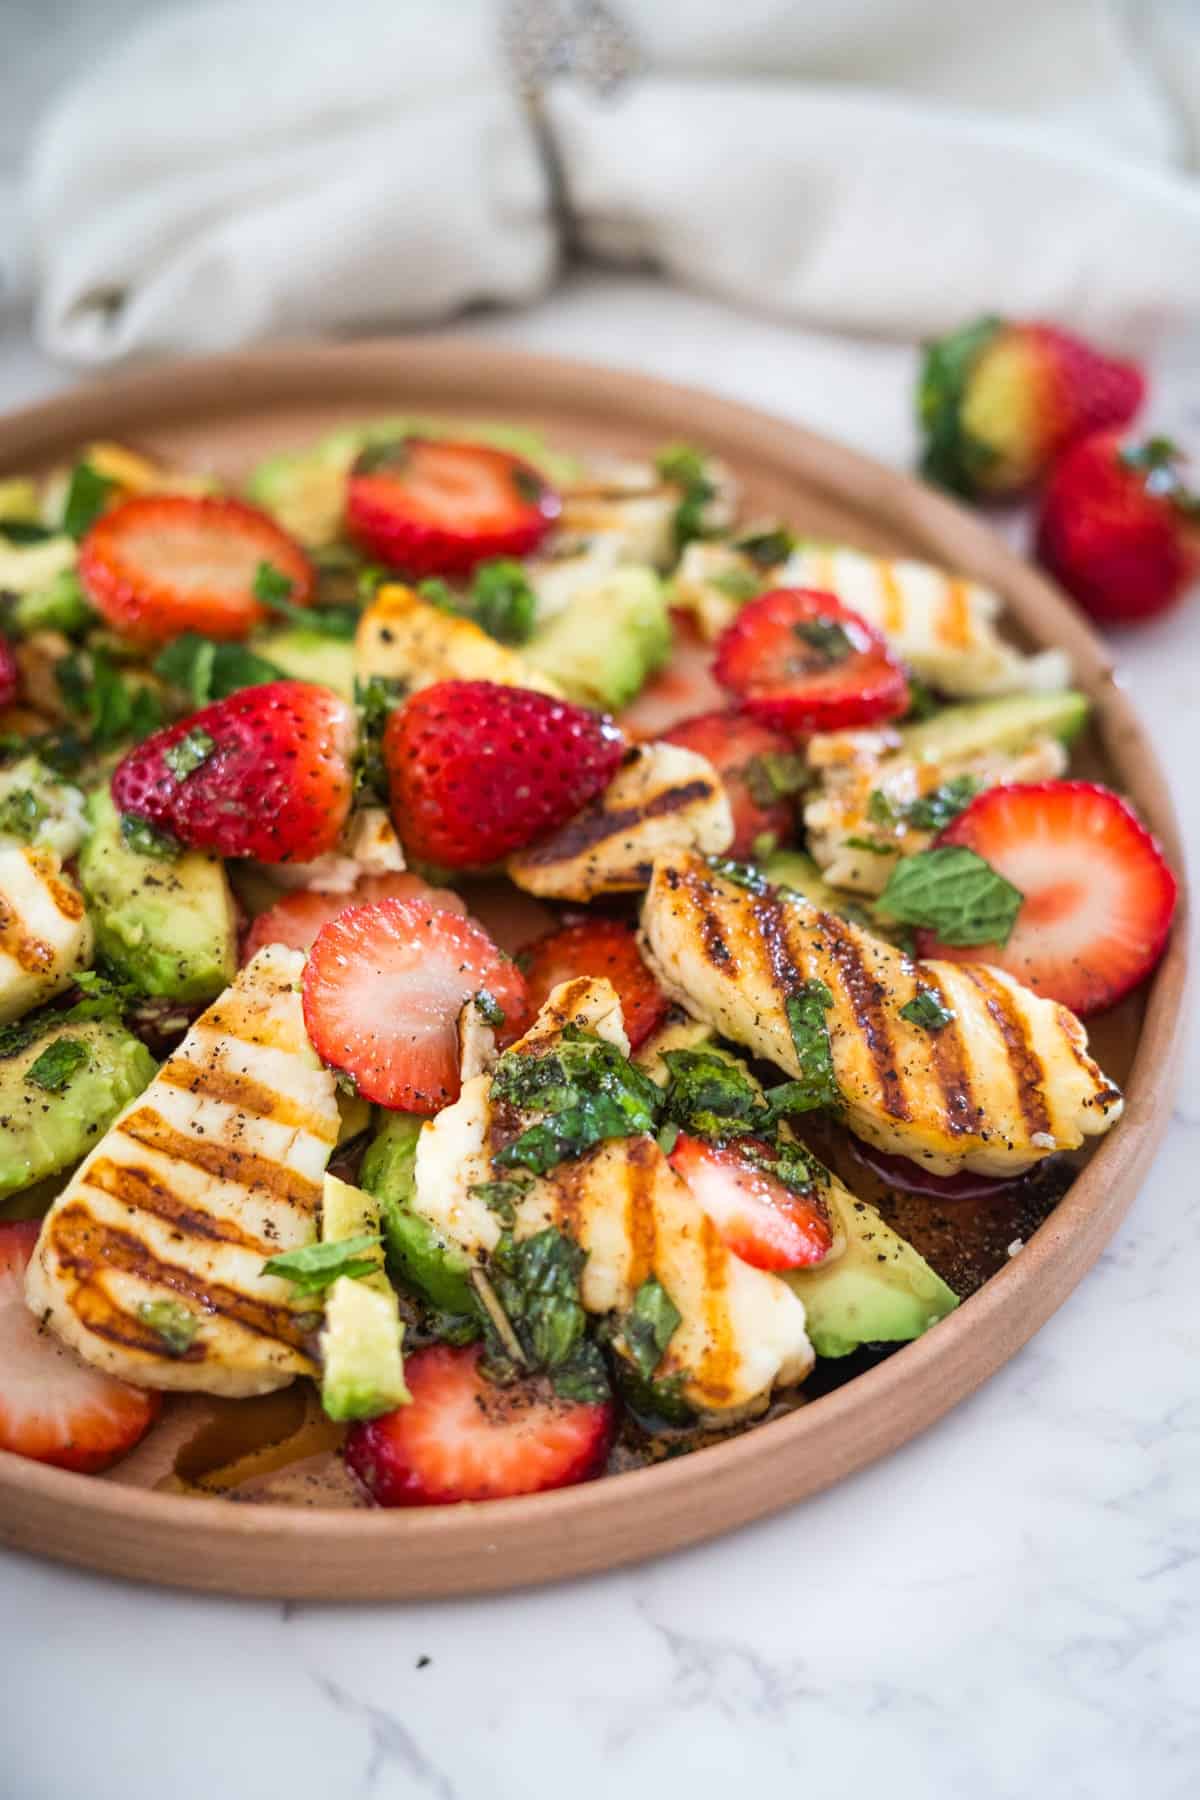 Grilled chicken salad with strawberries and avocado.